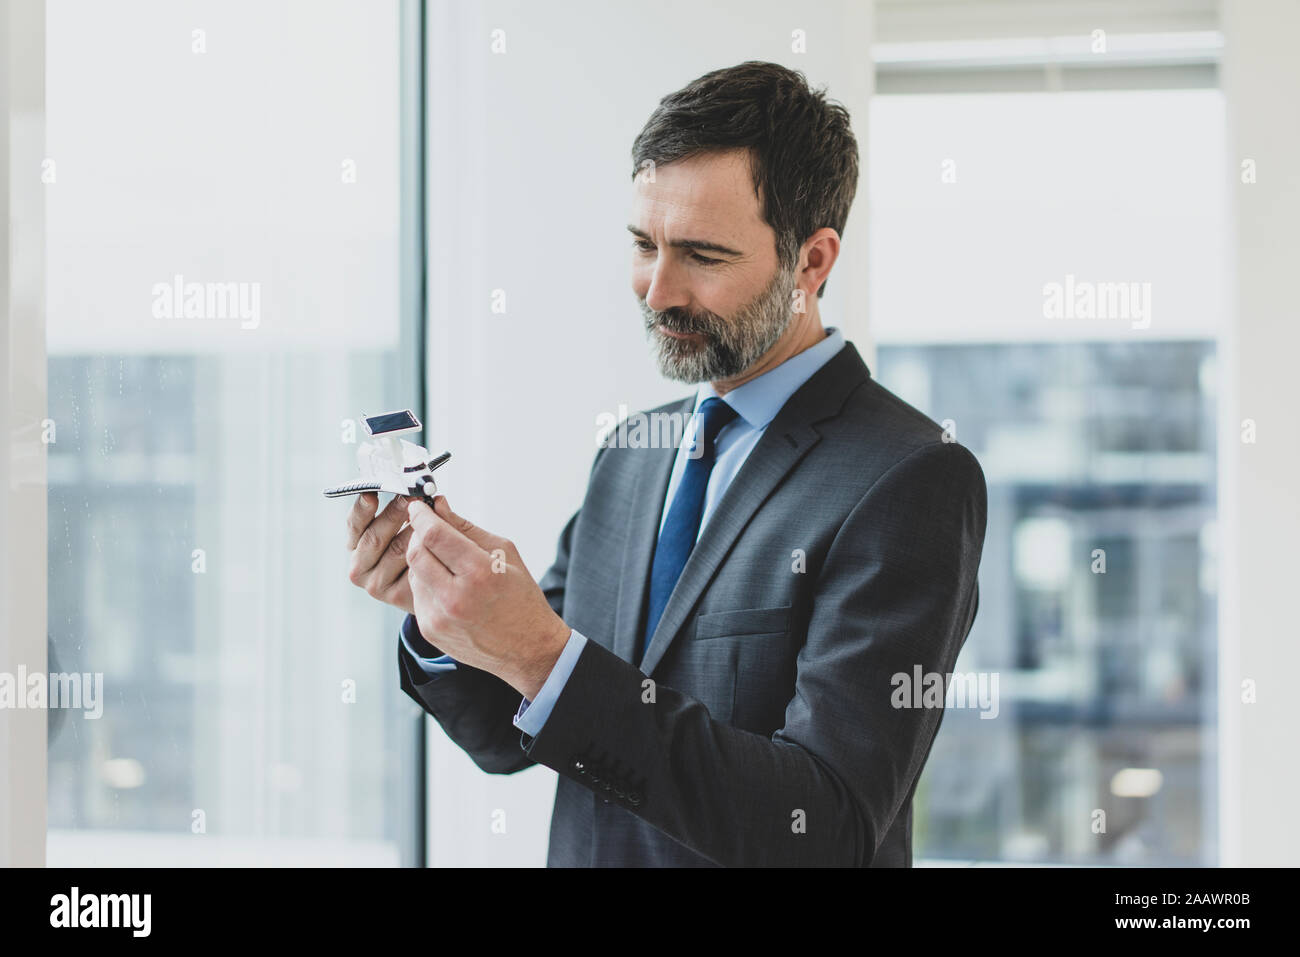 Smiling mature bussinessman holding space shuttle model Stock Photo